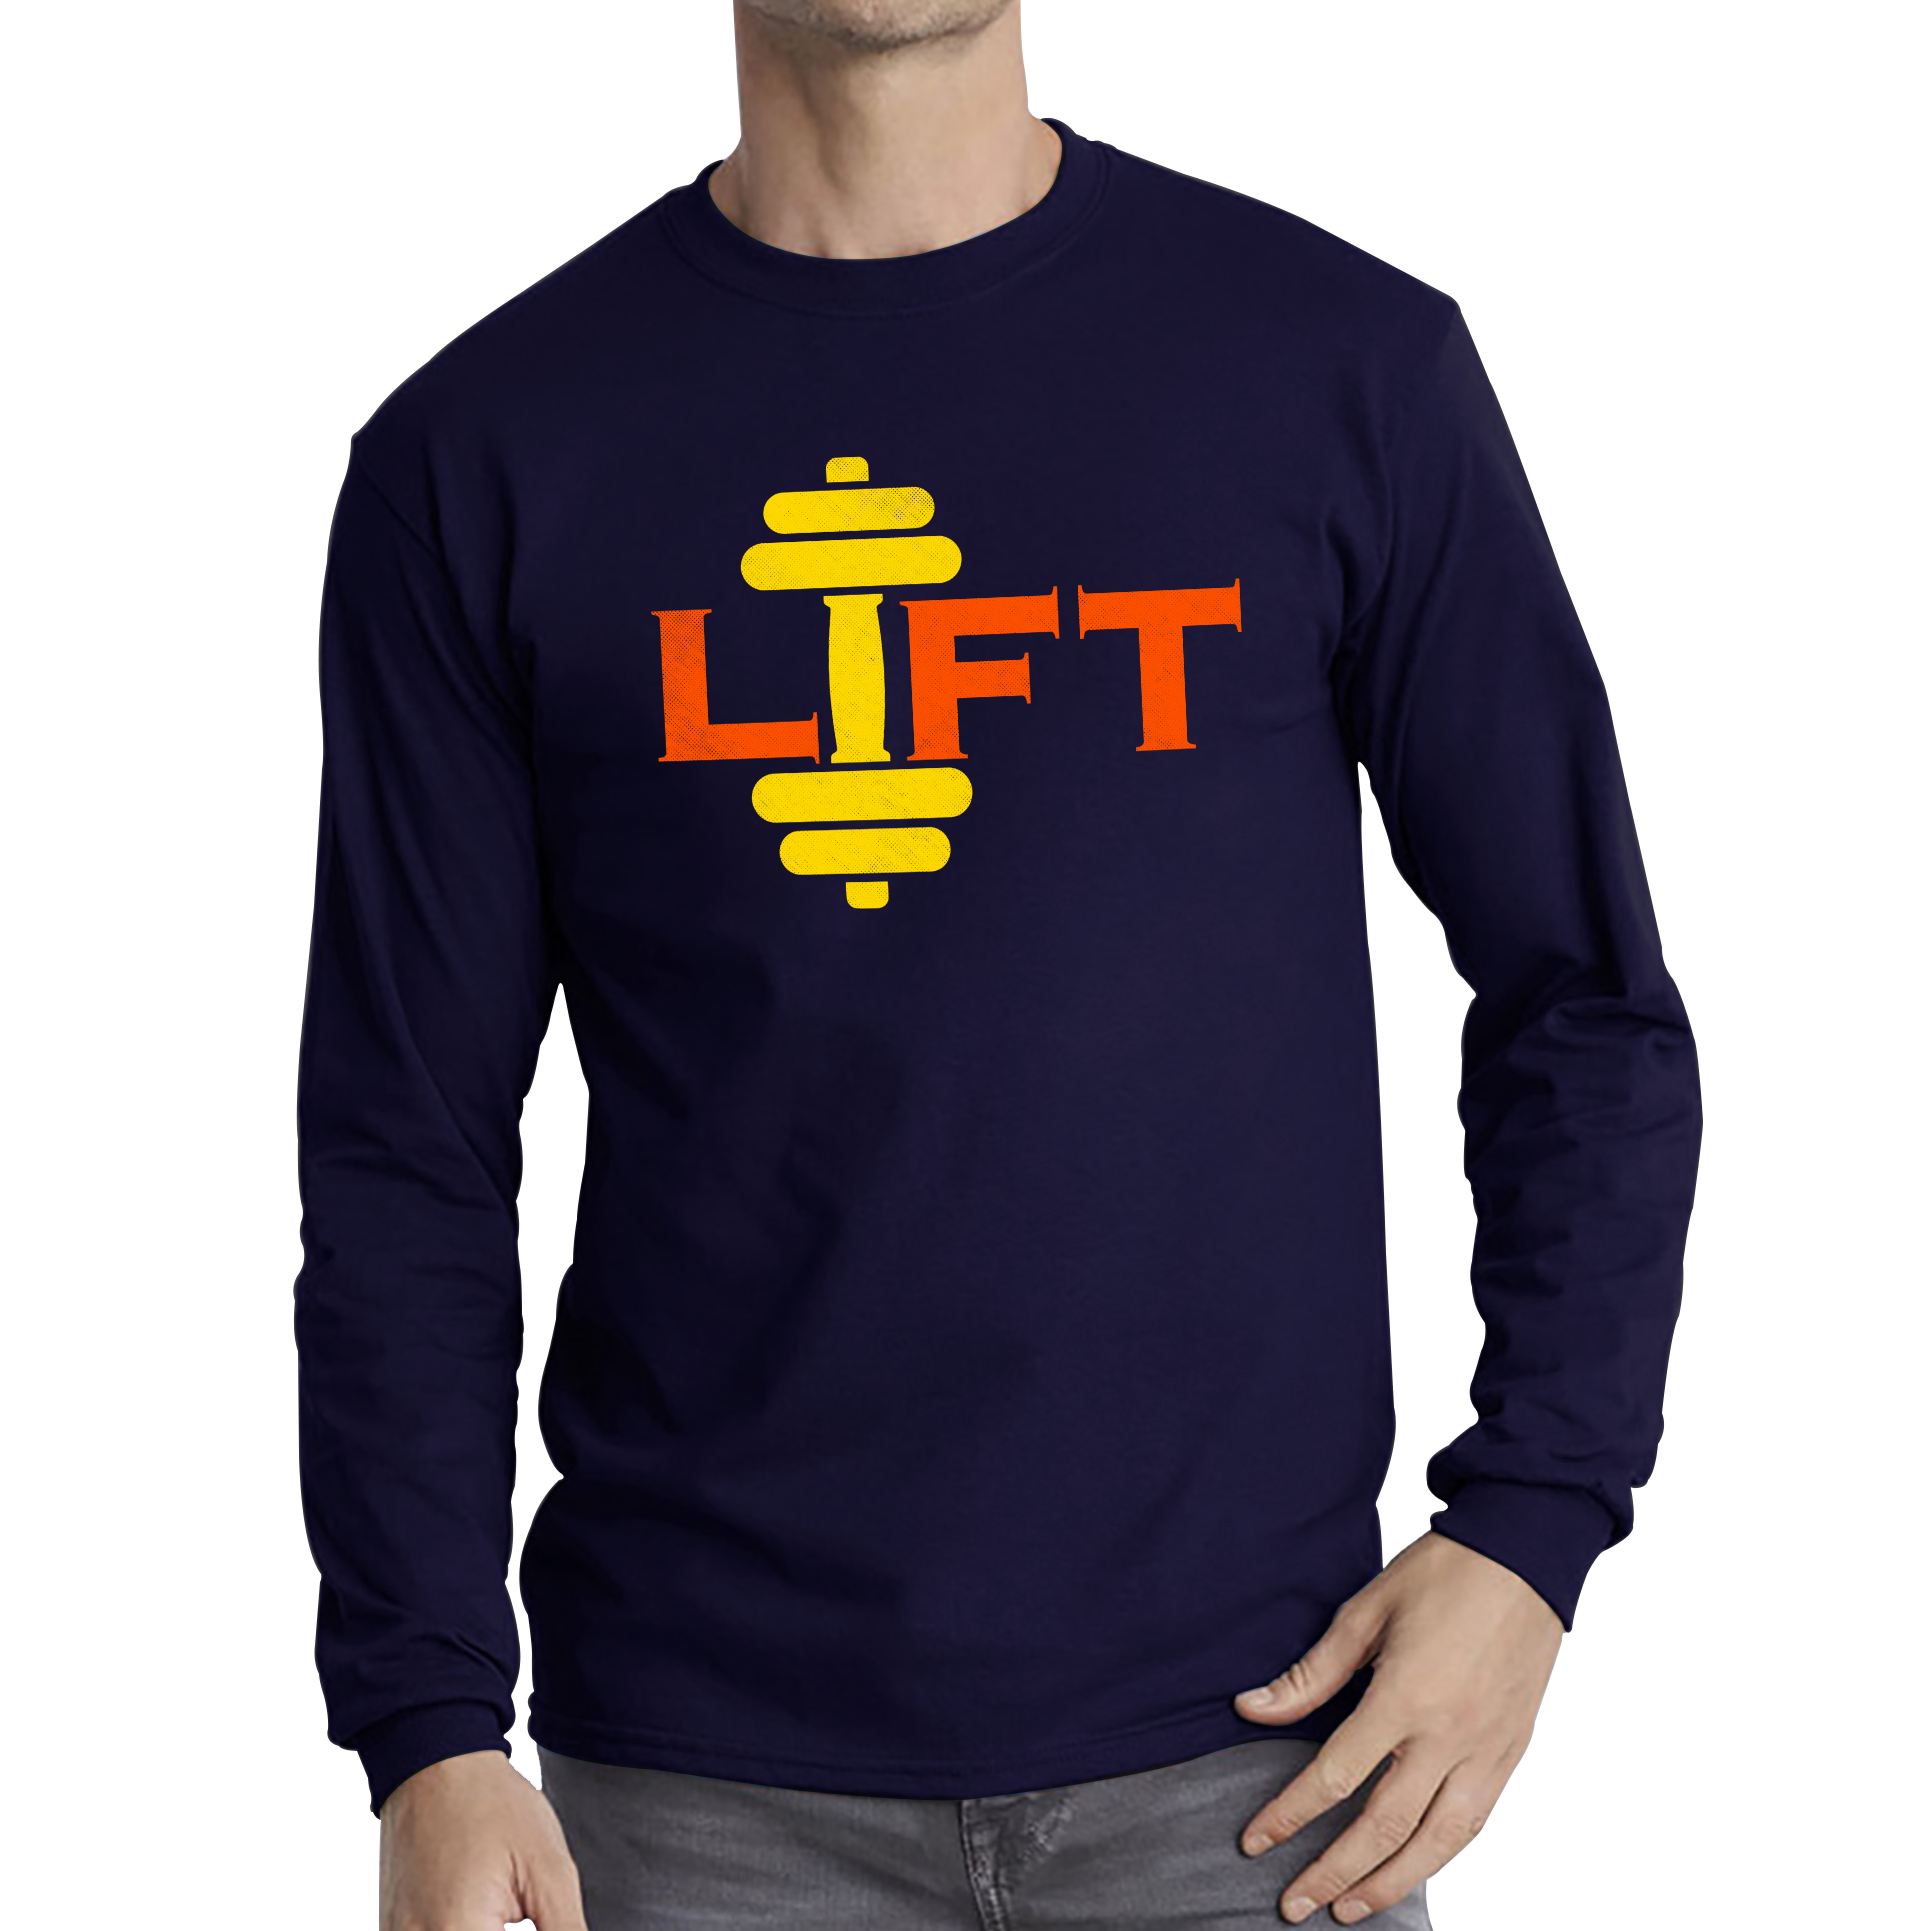 Lift Gym Training Workout Exercise Weight Lifting Dumbells Fitness Bodybuilding Long Sleeve T Shirt